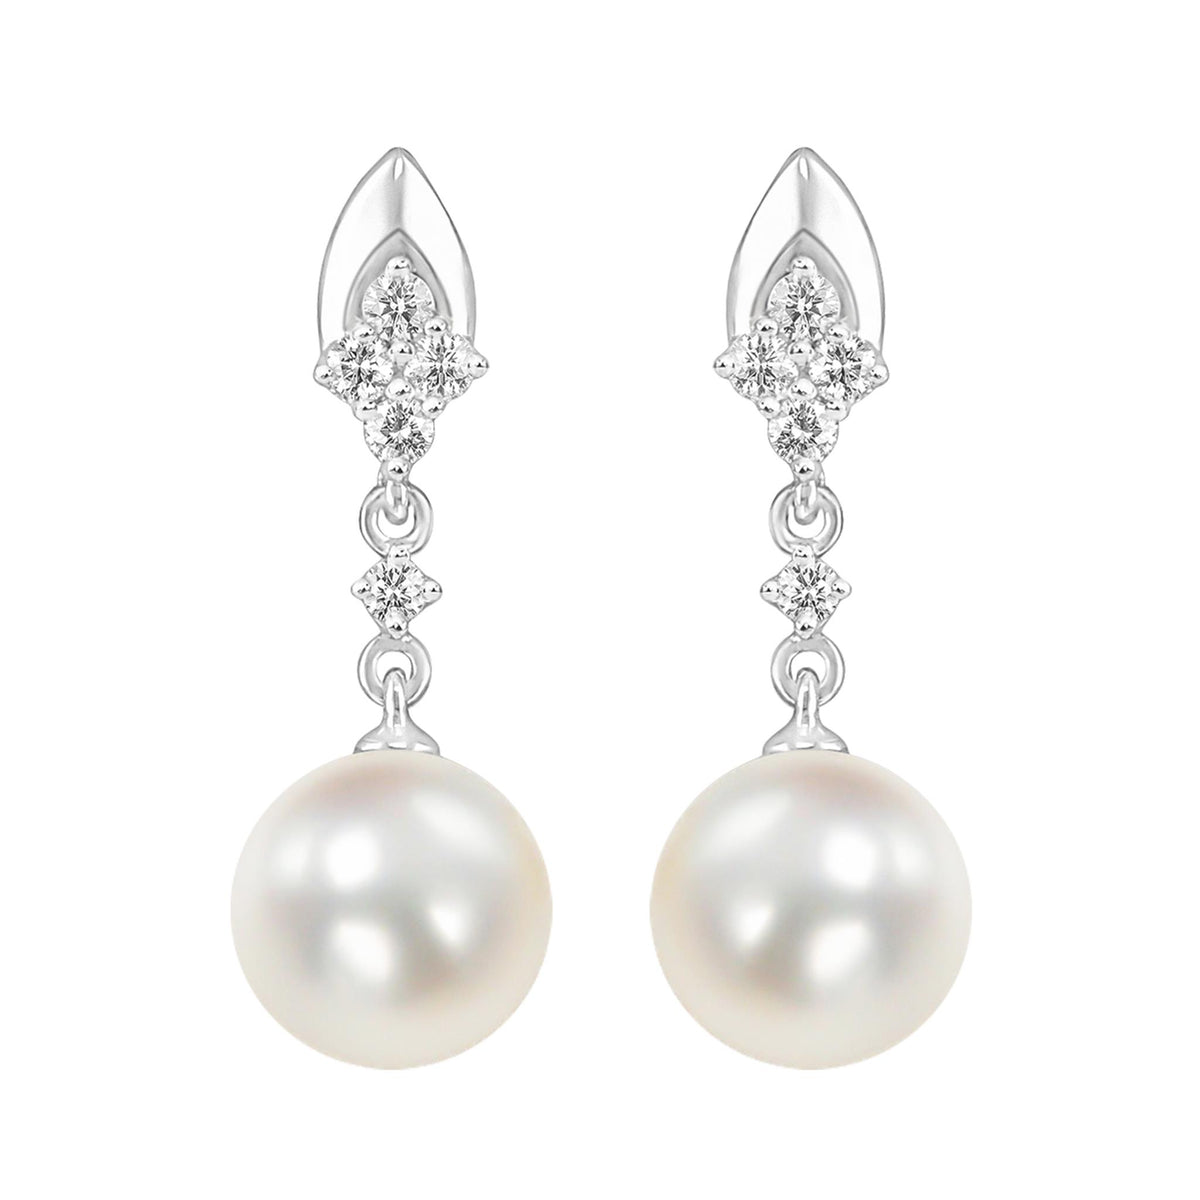 14Kt White Gold Dangle Earrings With 7mm Fresh Water Cultured Pearl